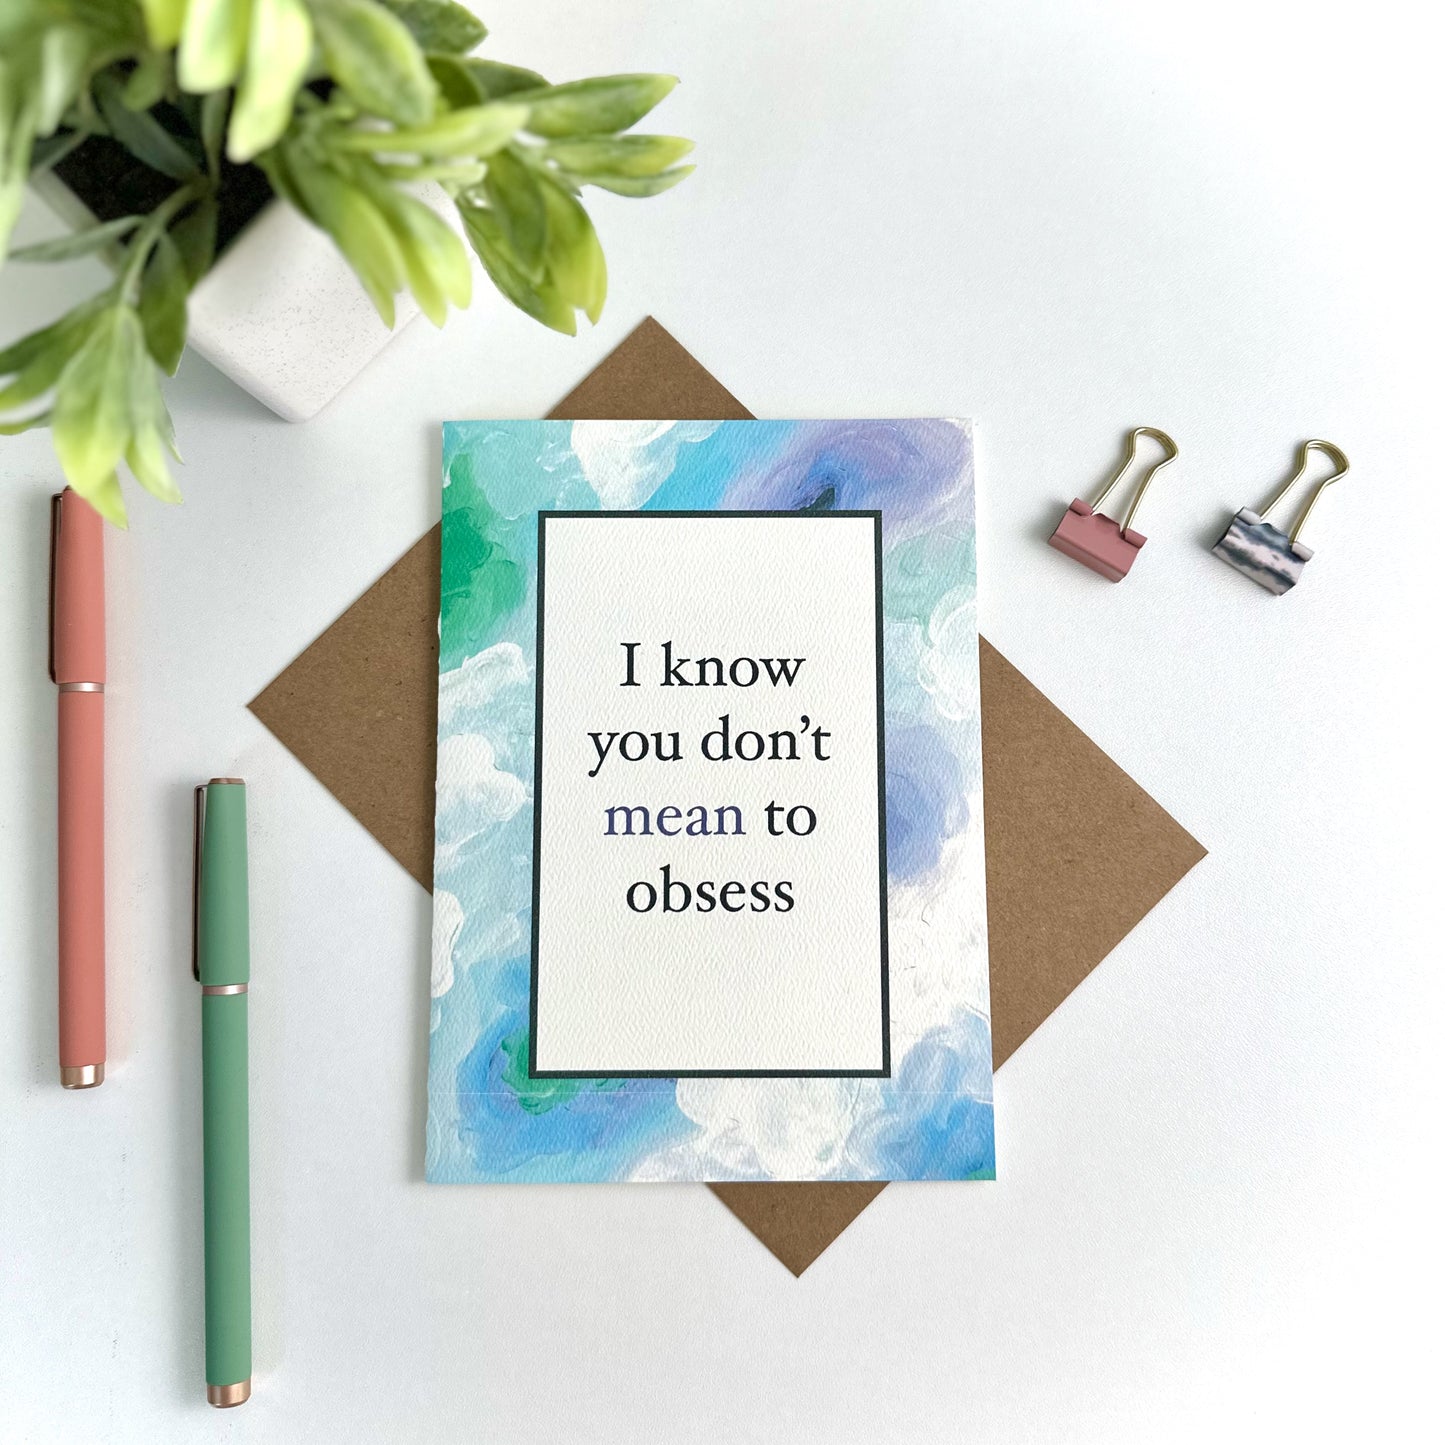 OCD Obsessive Compulsive Disorder Support Greeting Card